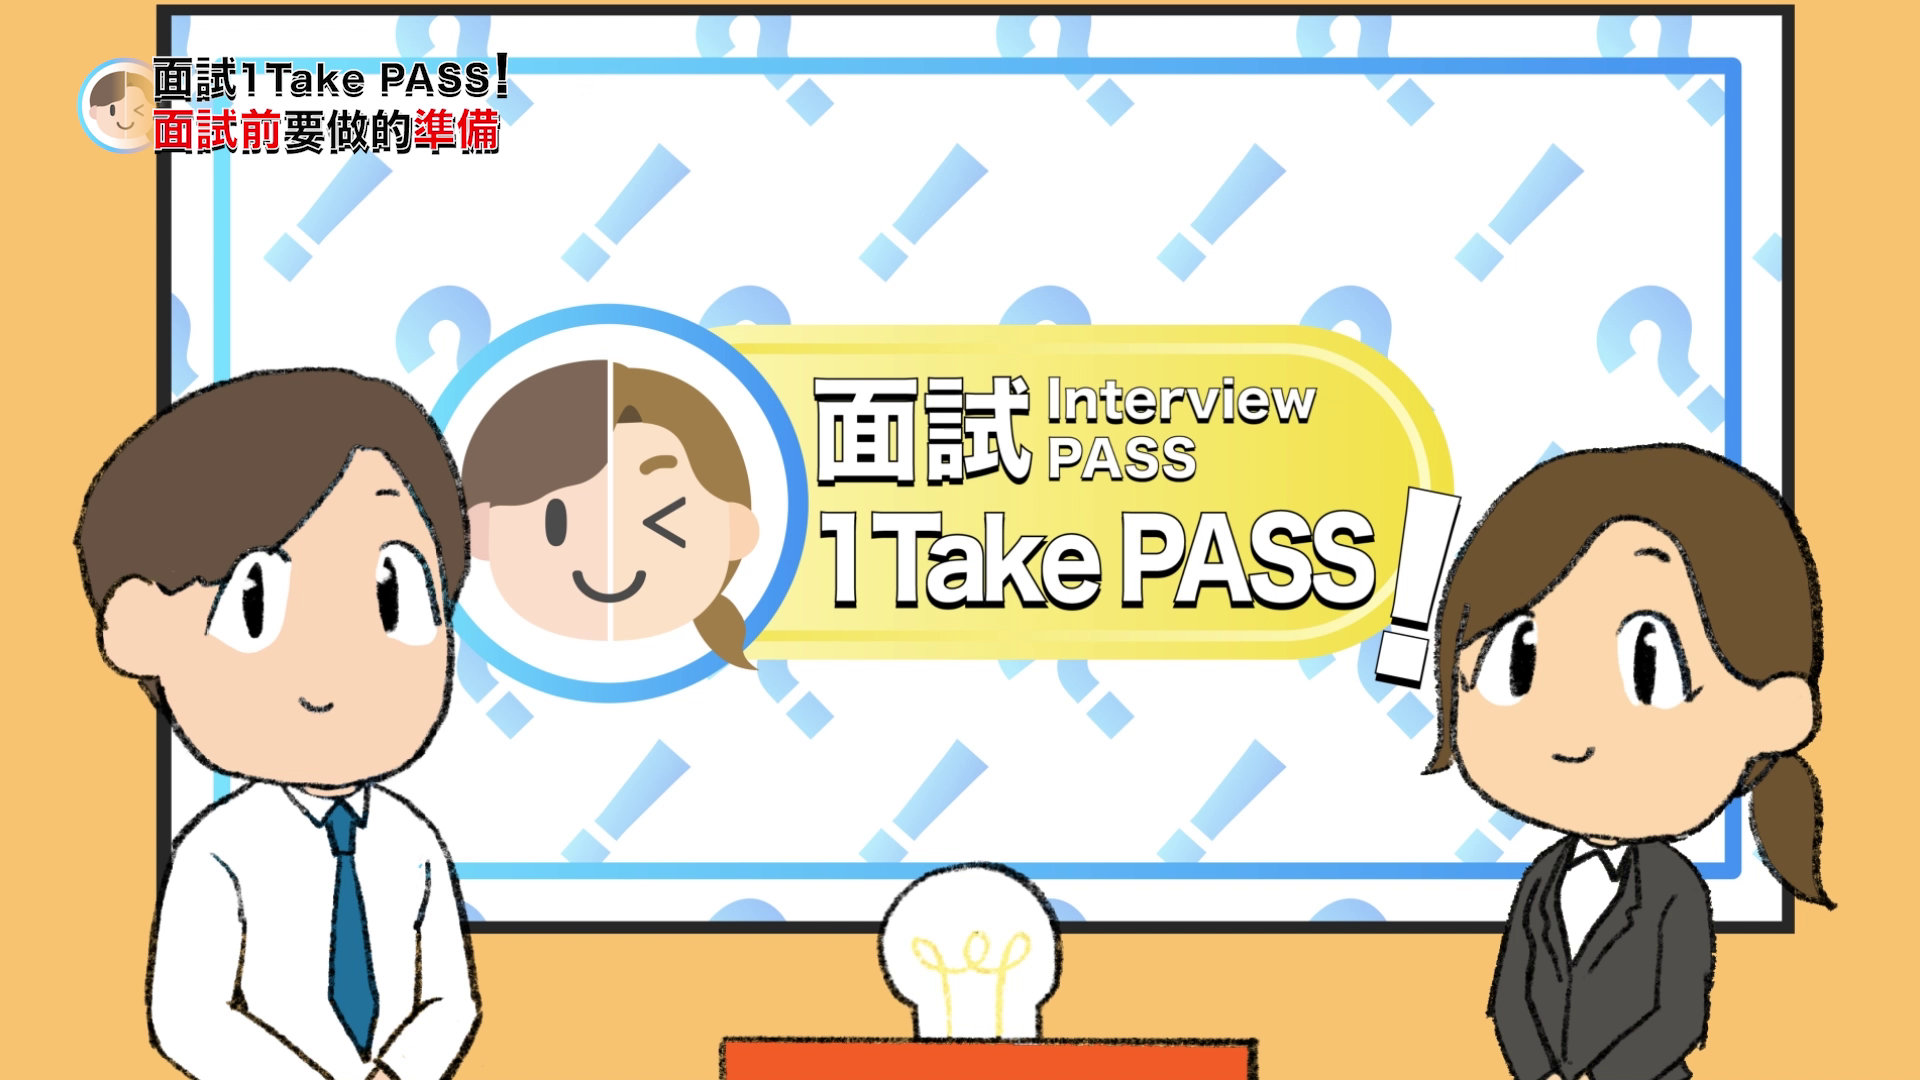 Career Guidance Video 04 – Interview “One-Take” Pass!